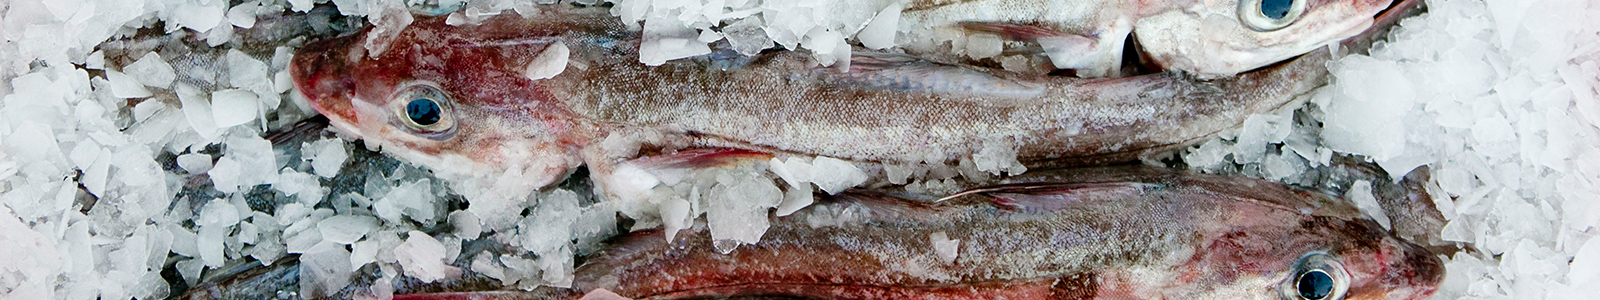 freshly caught fish stored on ice